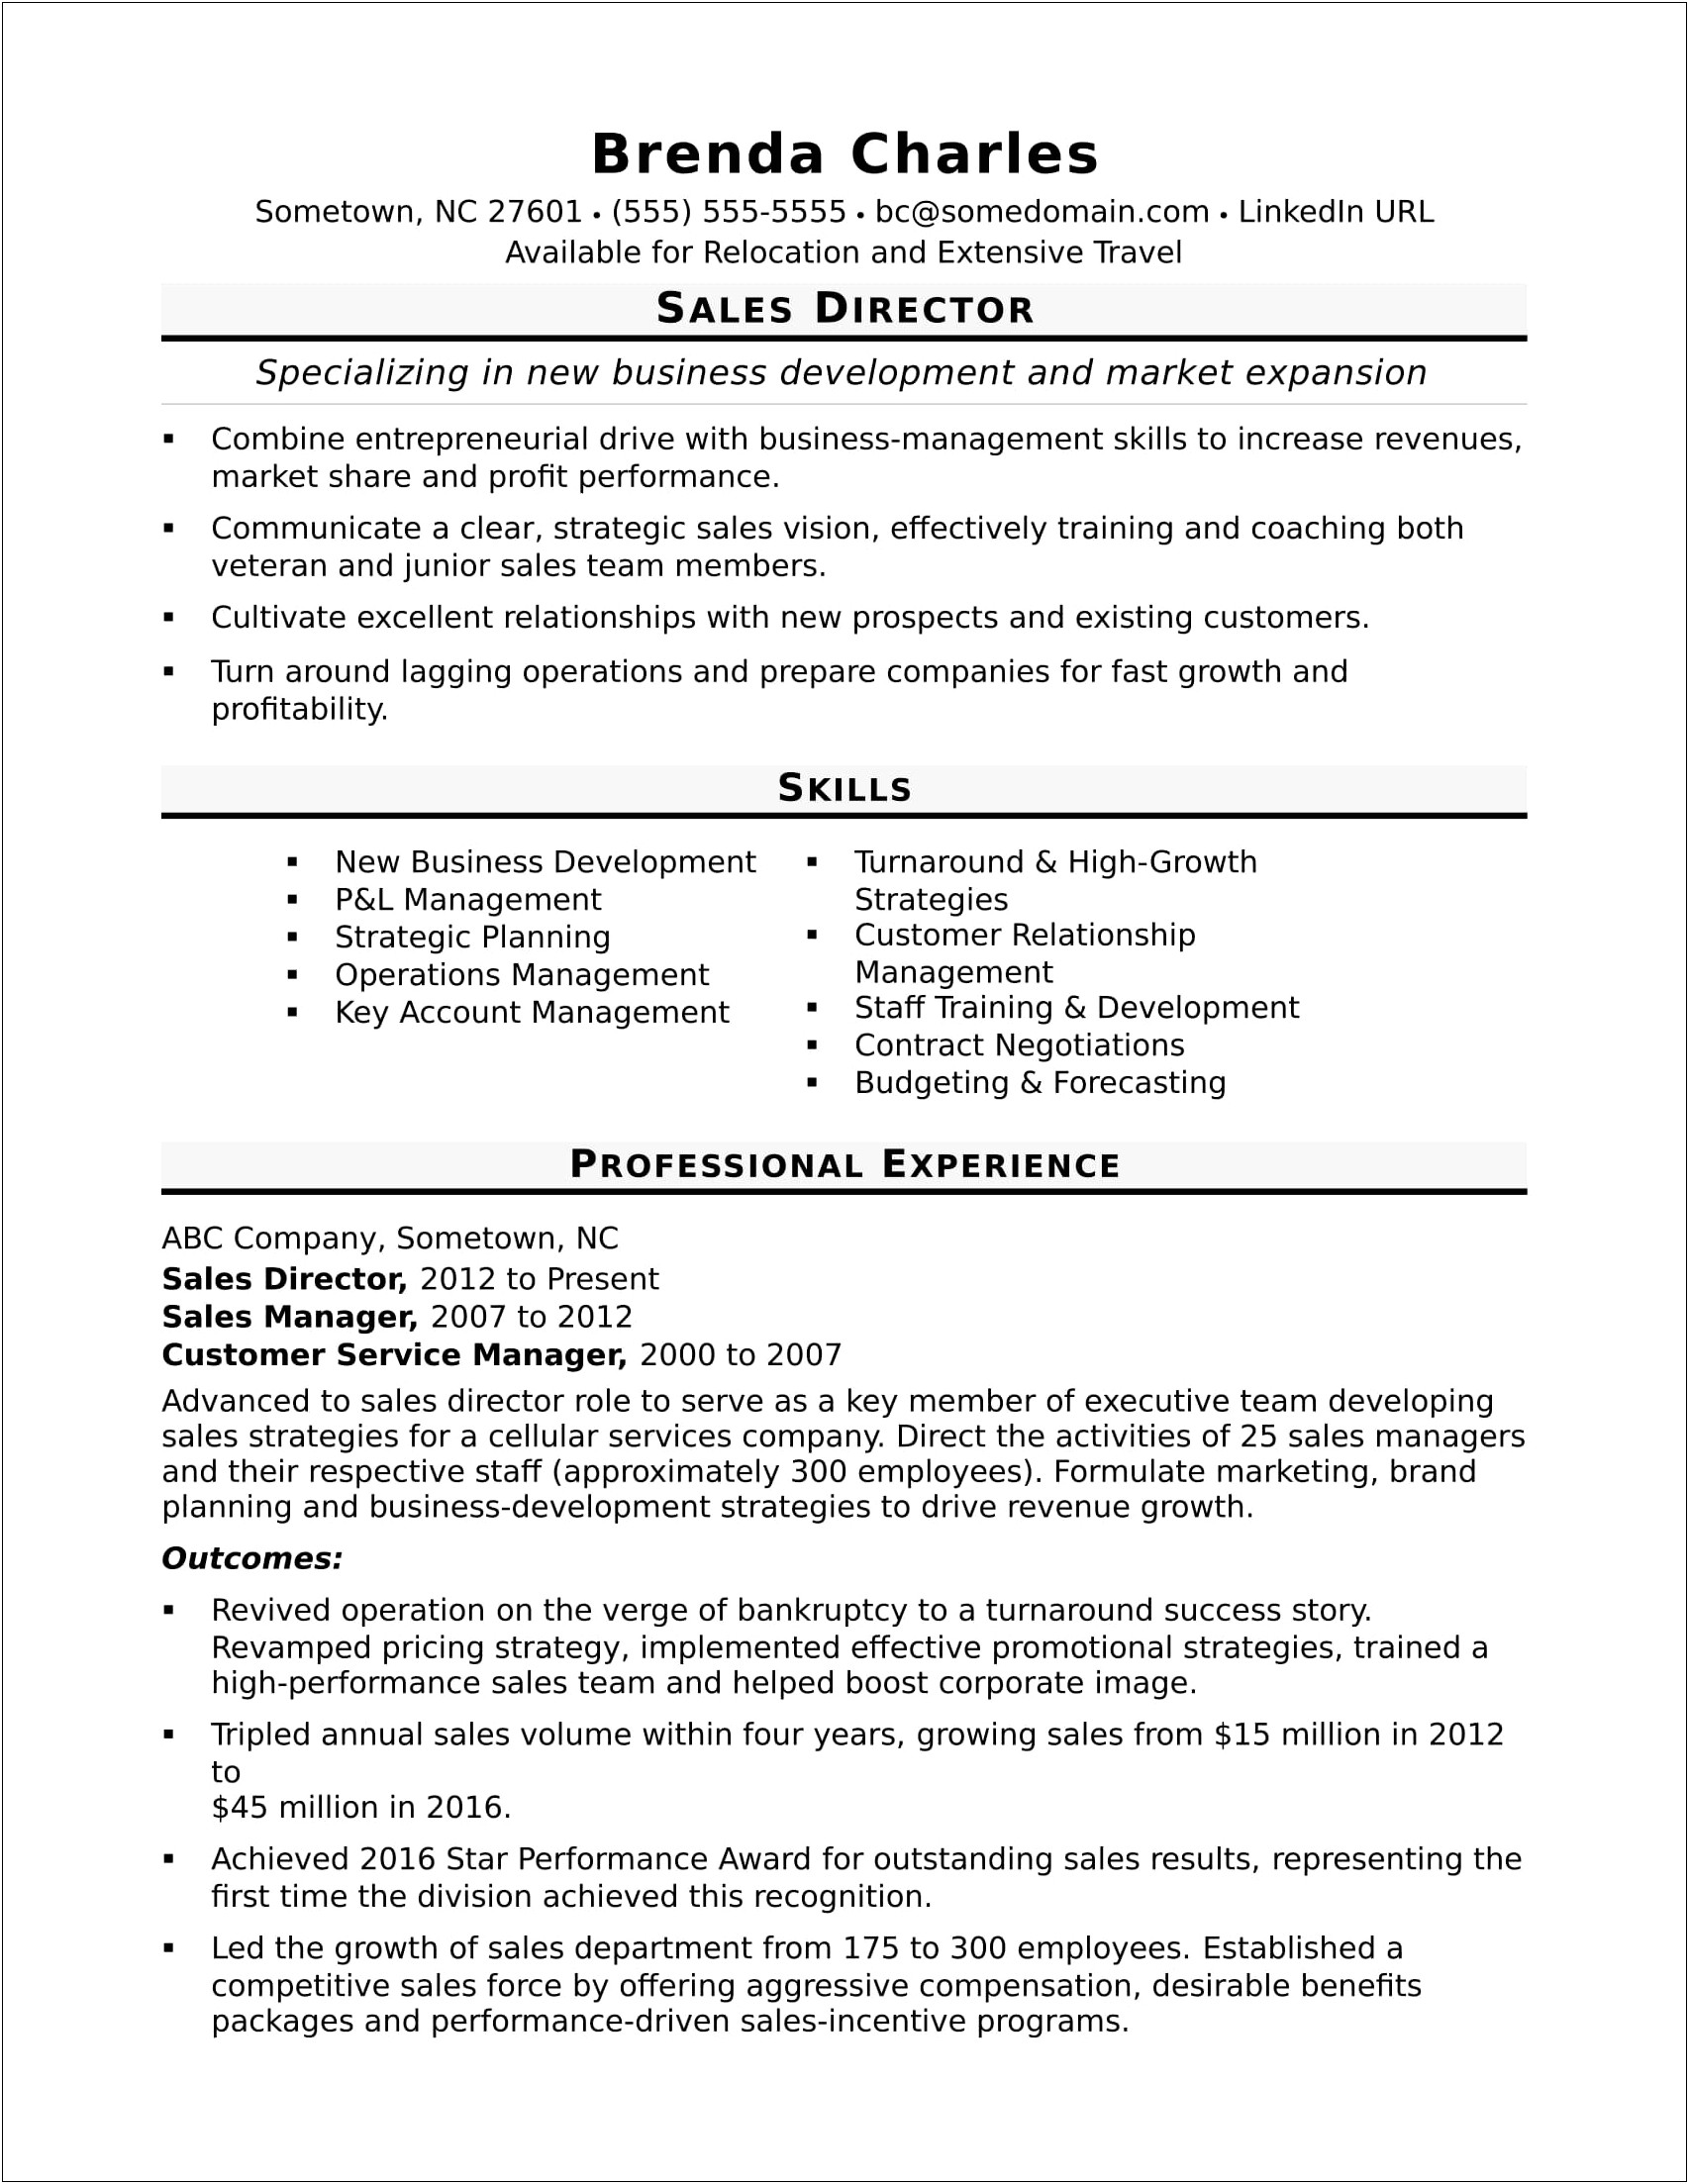 Sales Skills And Abilities Resume Examples